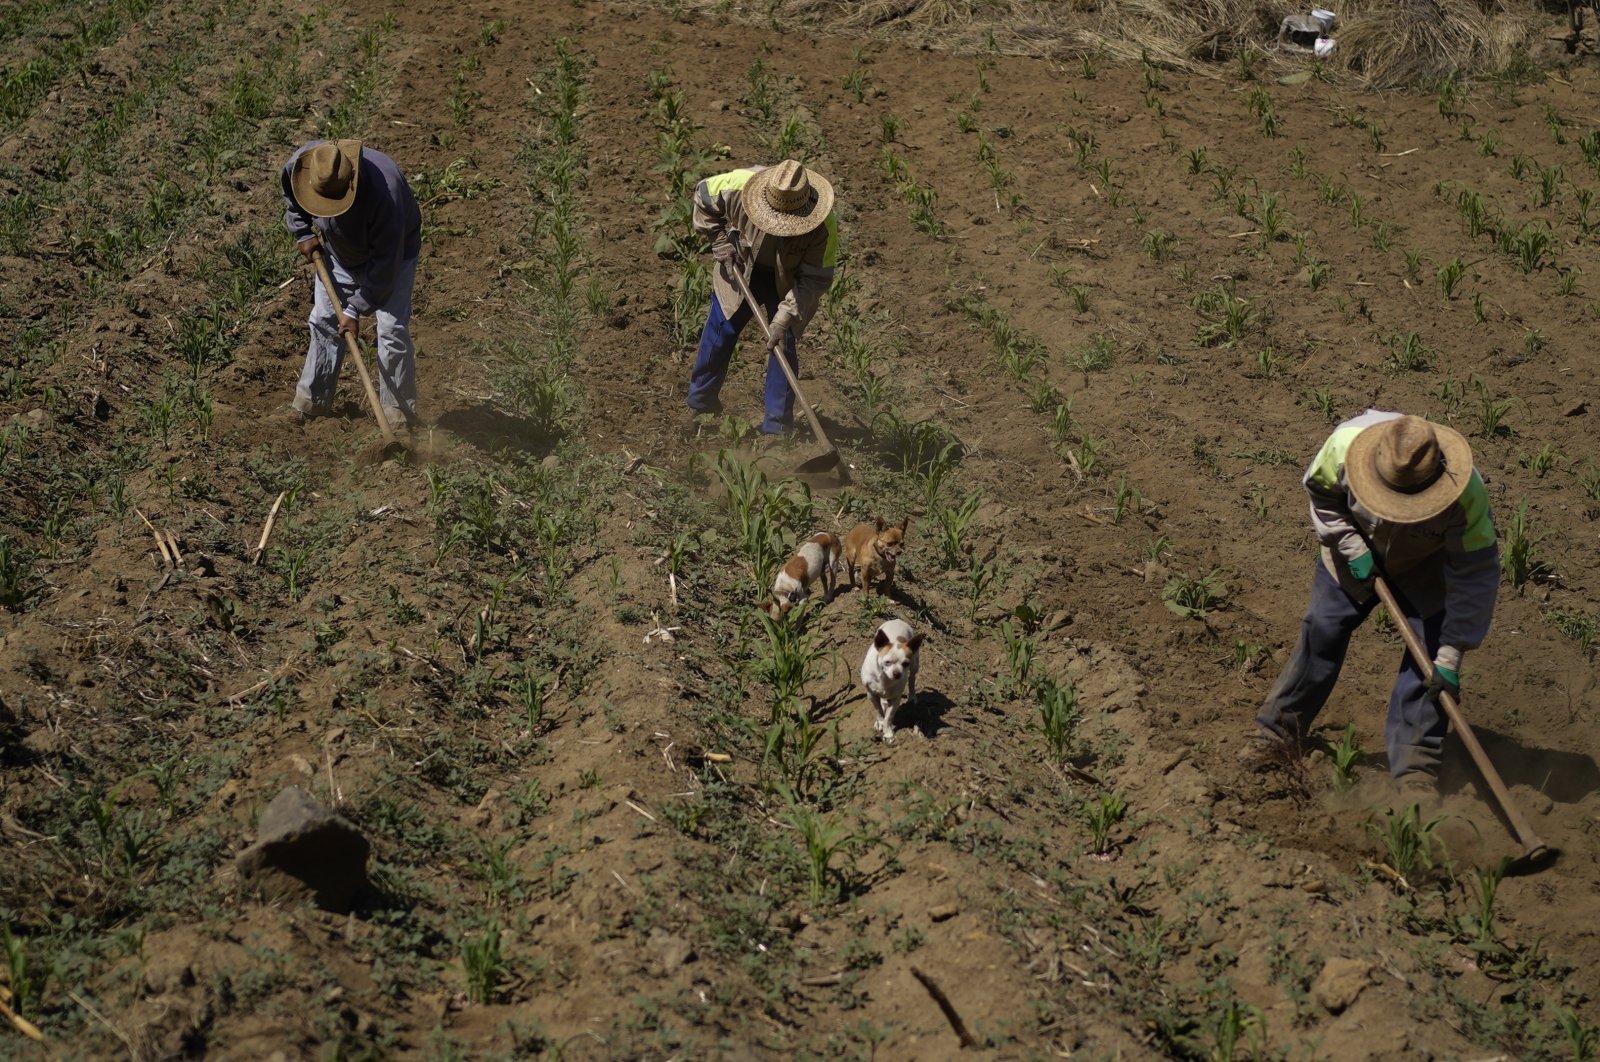 Brothers Arturo, Benjamin and Victor Corella, work their land in Milpa Alta south of Mexico City, Mexico, May 30, 2022. (AP Photo)